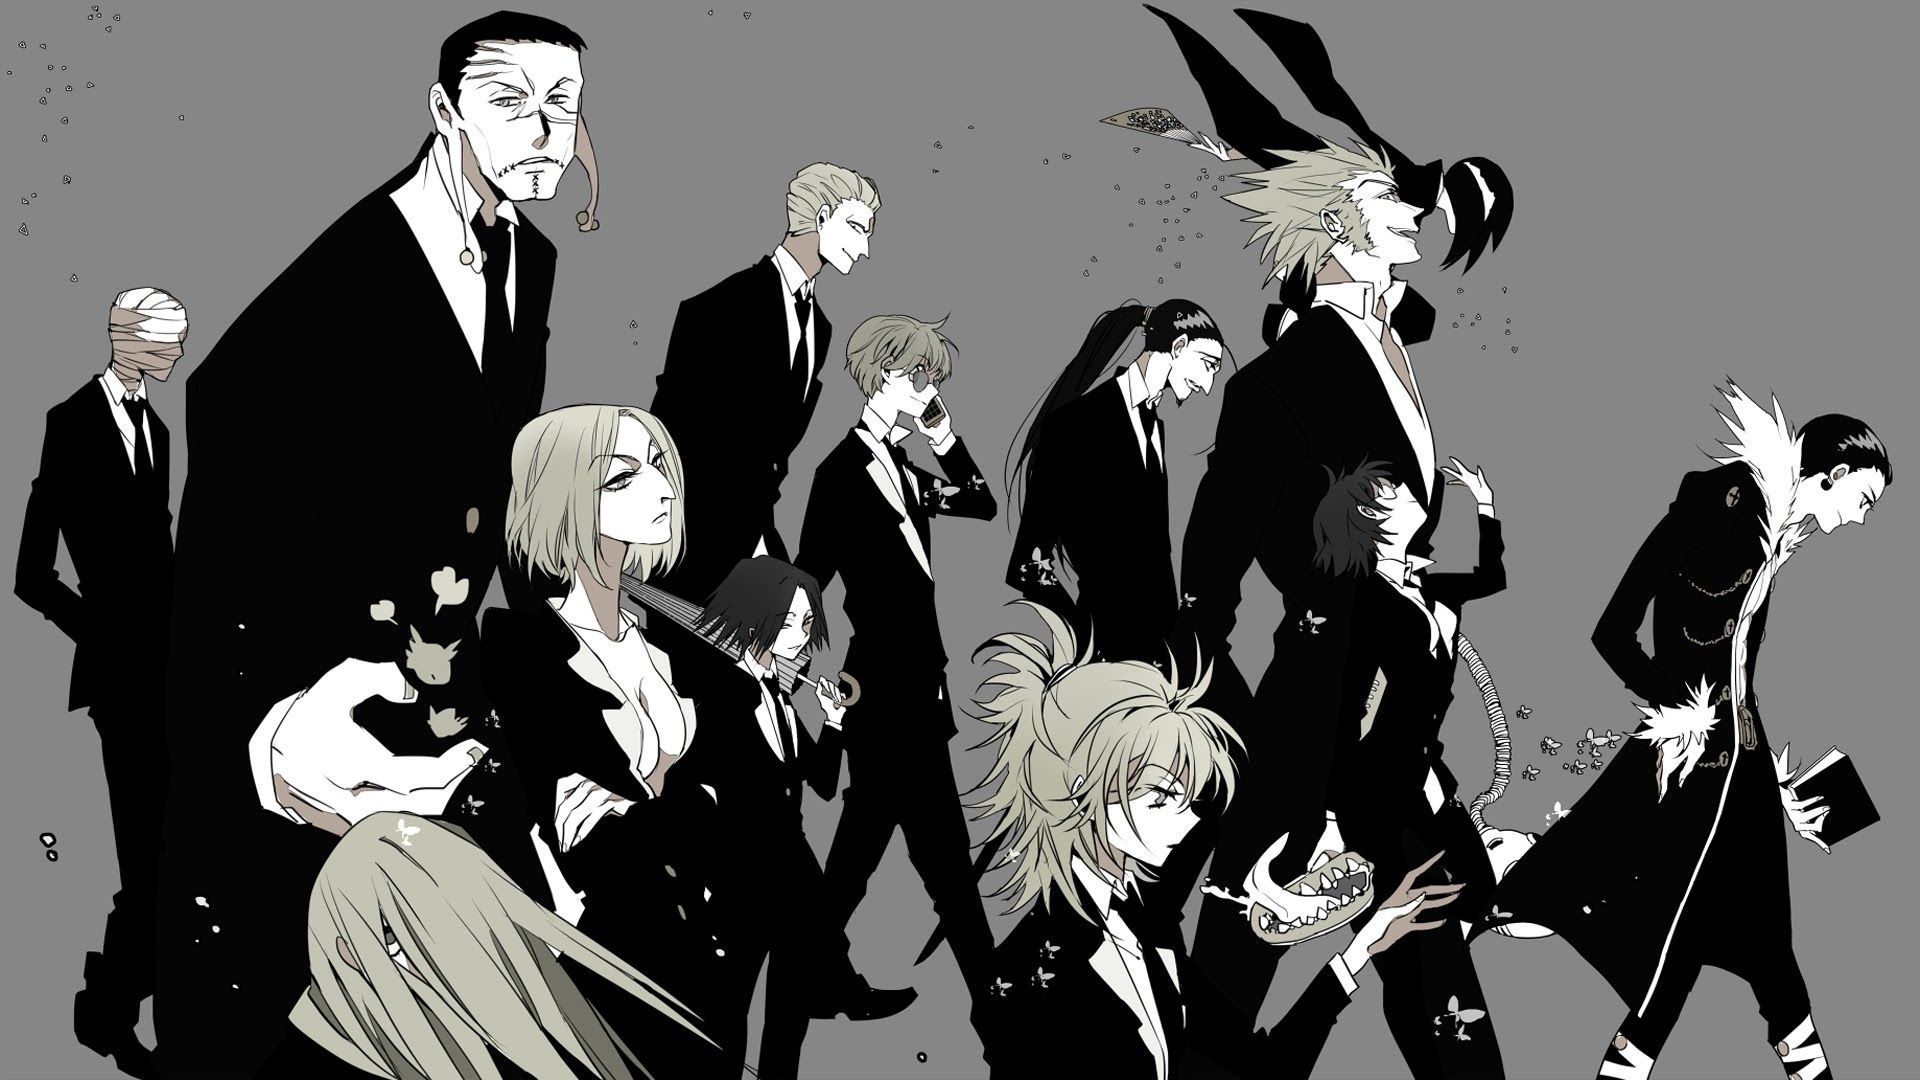 Phantom Troupe Computer Wallpapers - Wallpaper Cave.